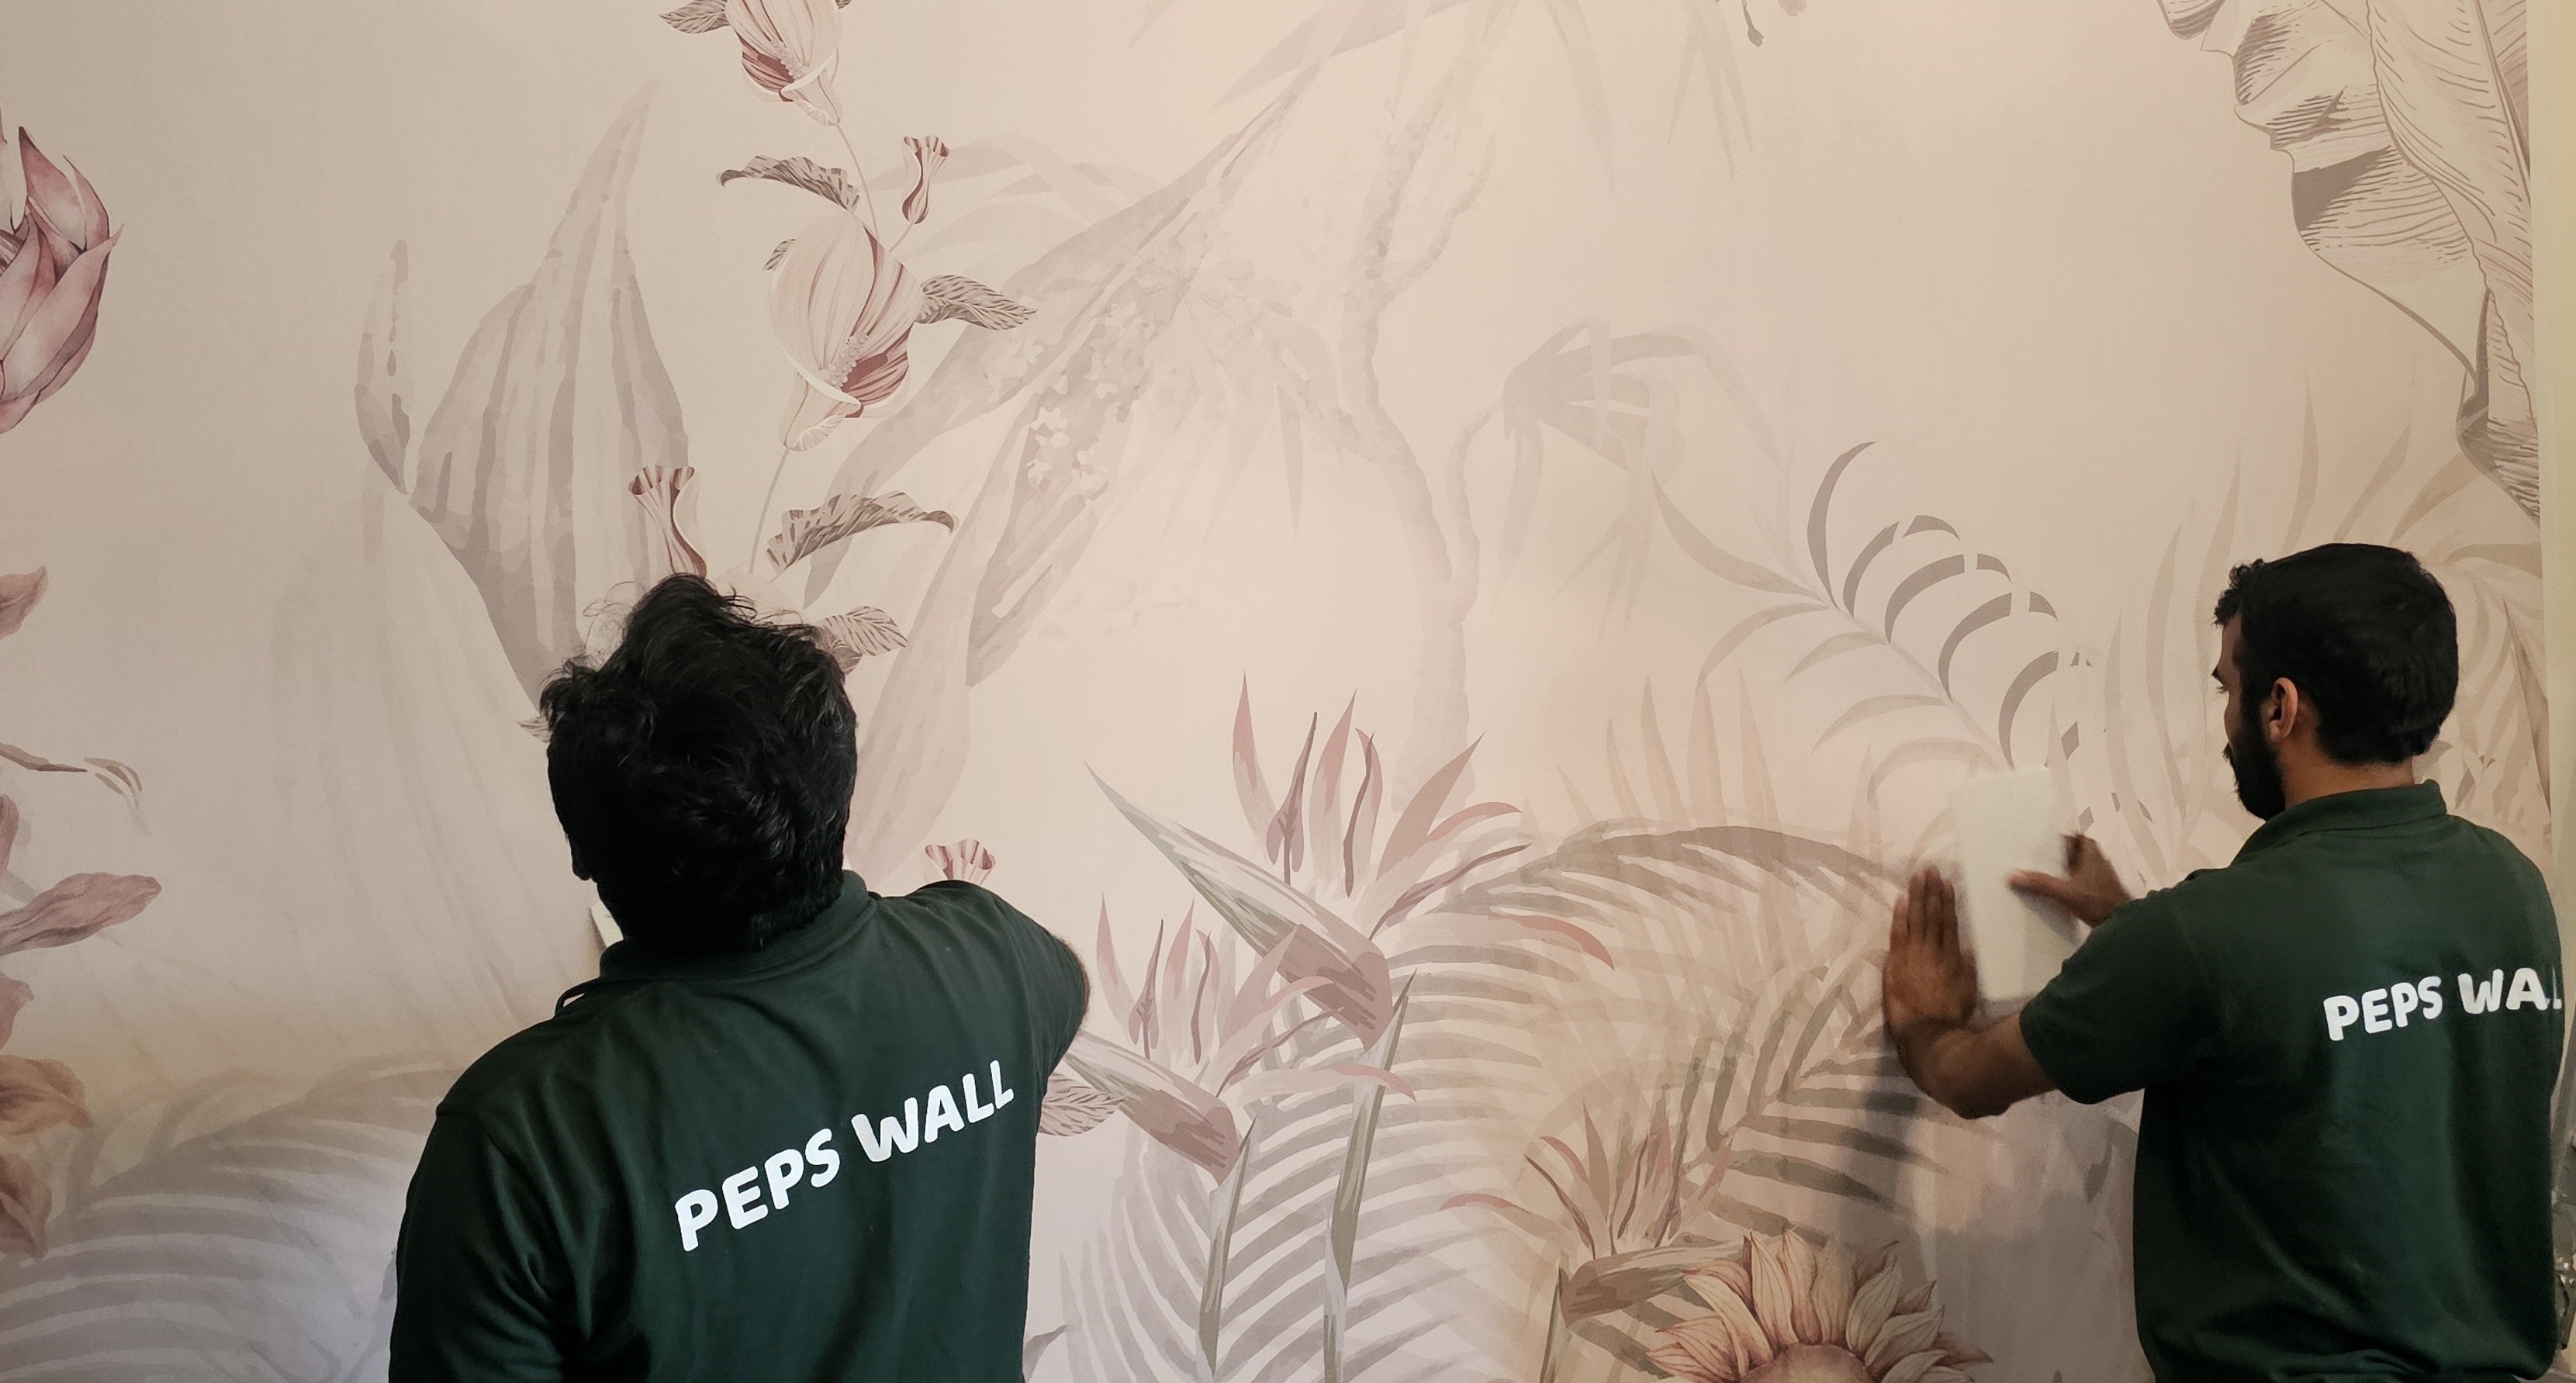 7 Reasons Why Wallpaper is Perfect when renting.